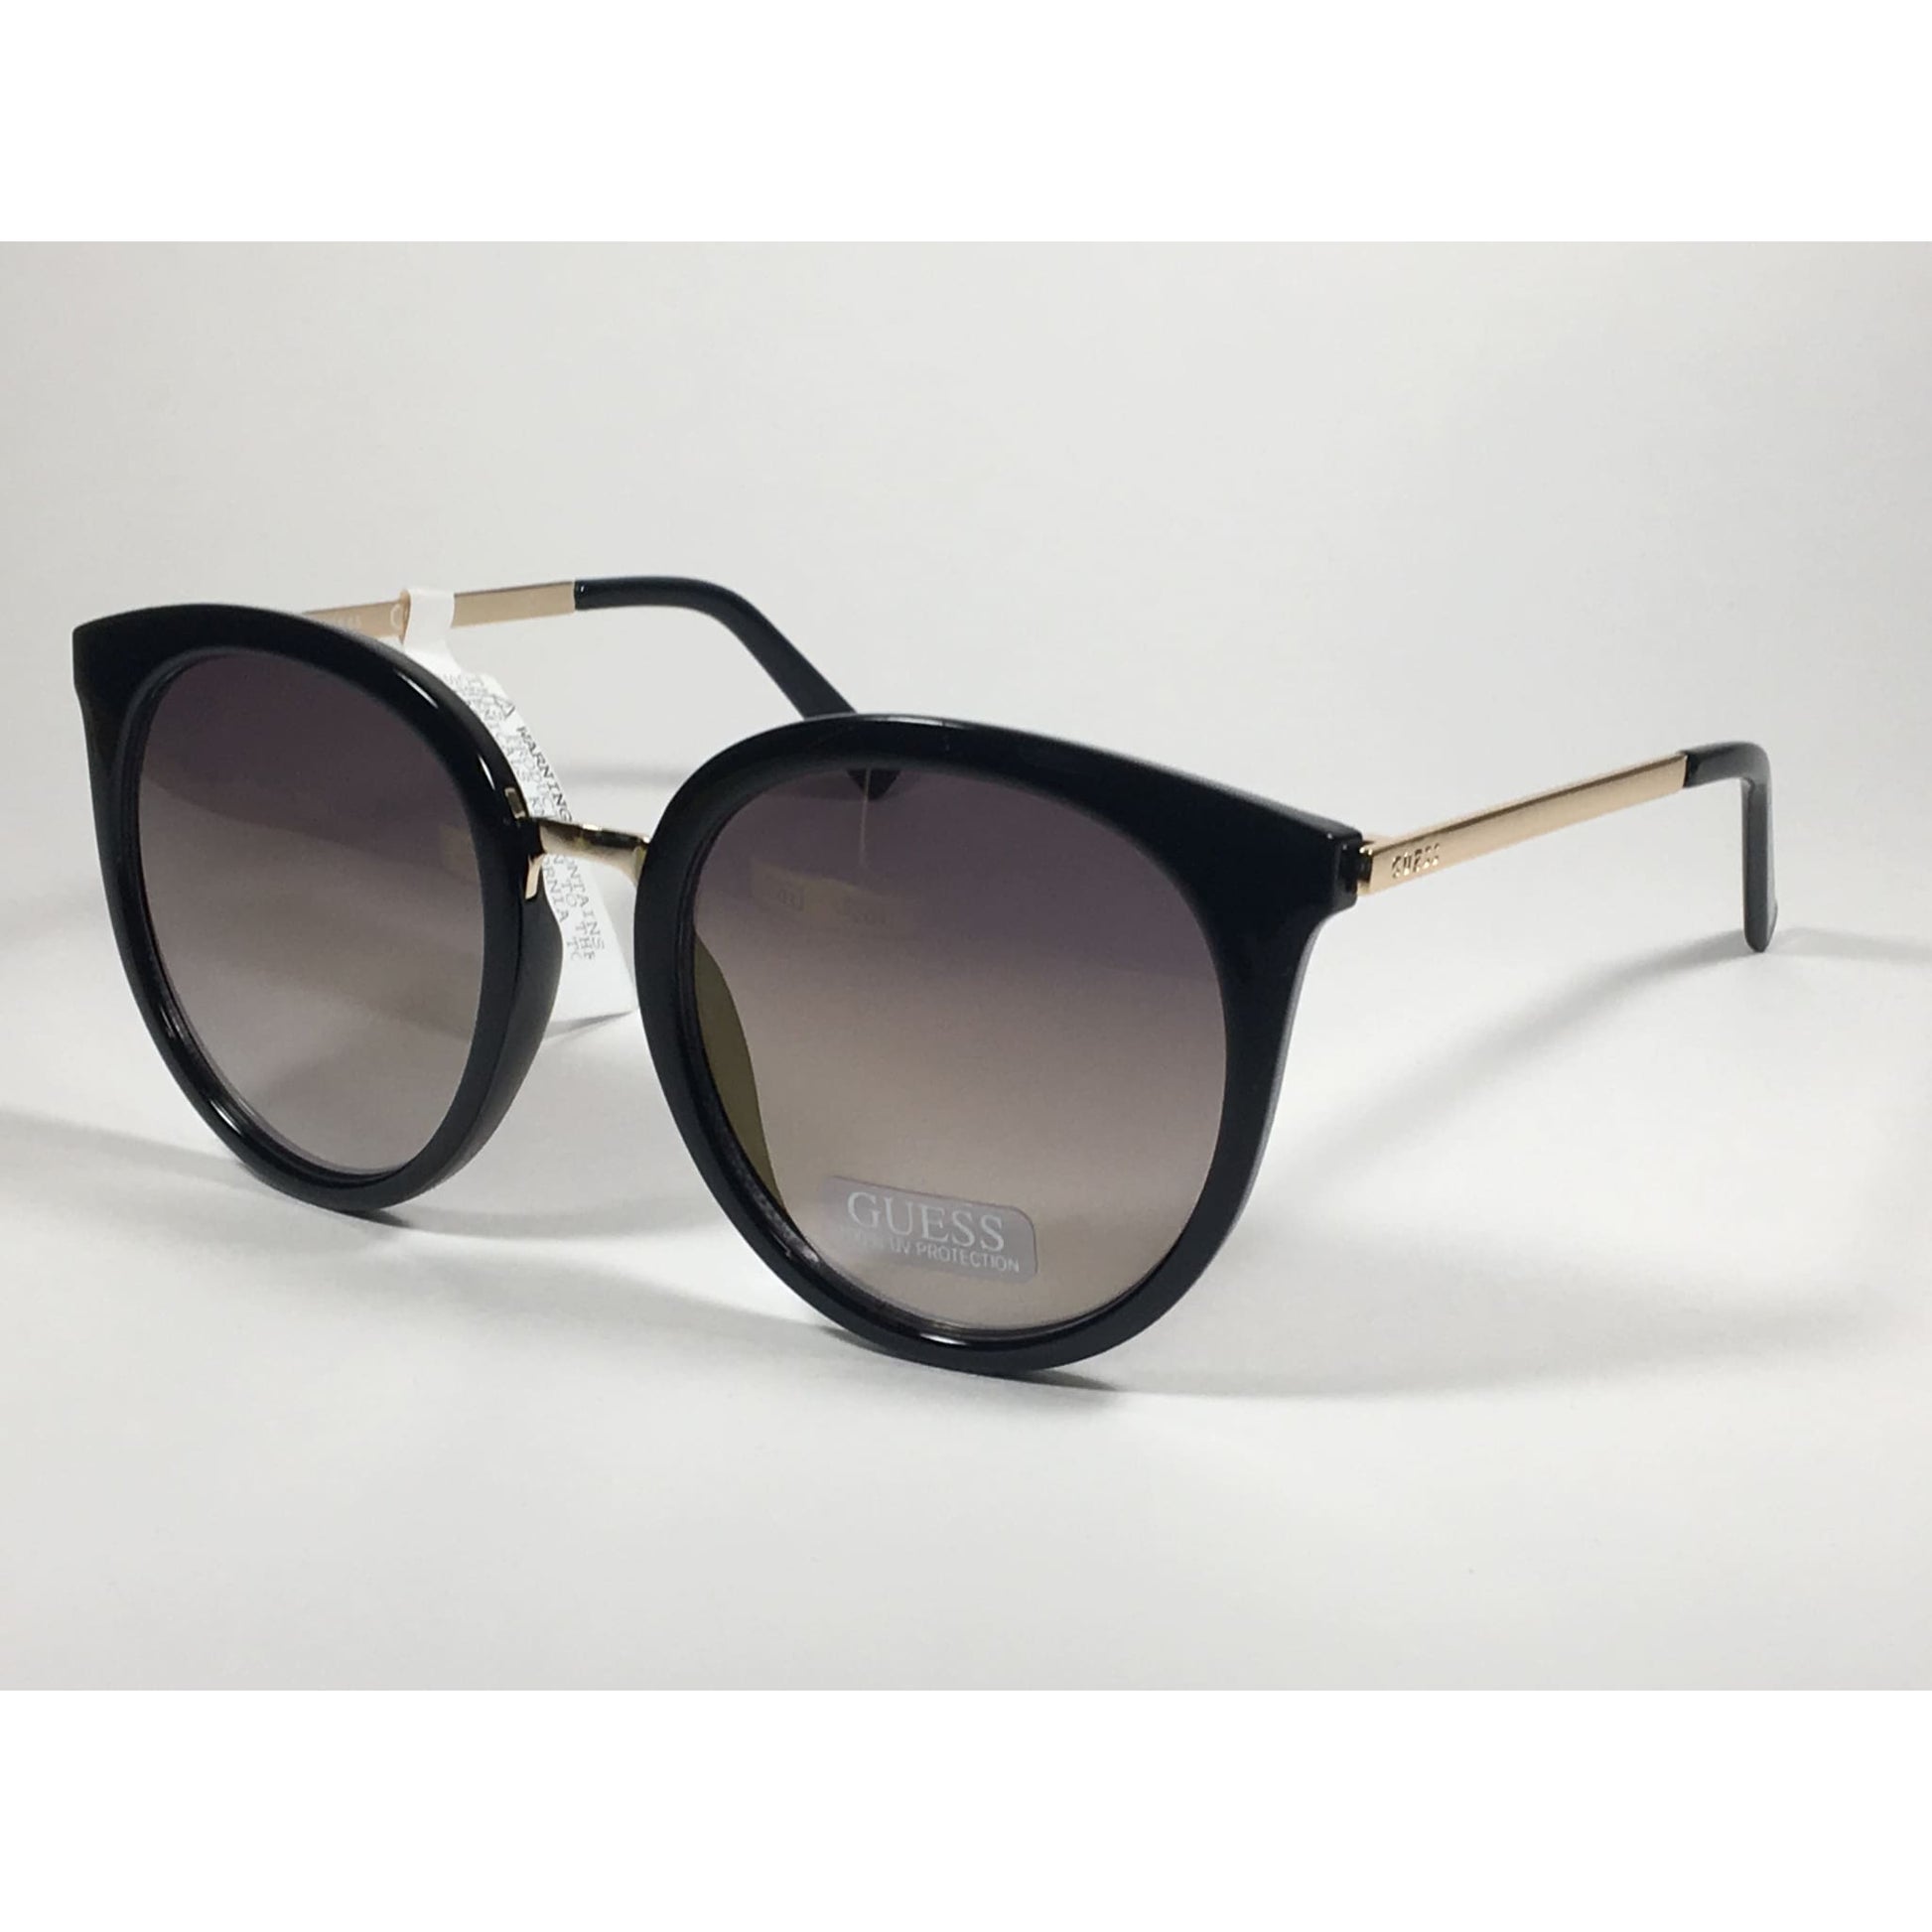 Guess Large Round Sunglasses Gold Tone Black Frame Brown Smoke Gradient Lens With Gold Flash GF0324 01C - Sunglasses